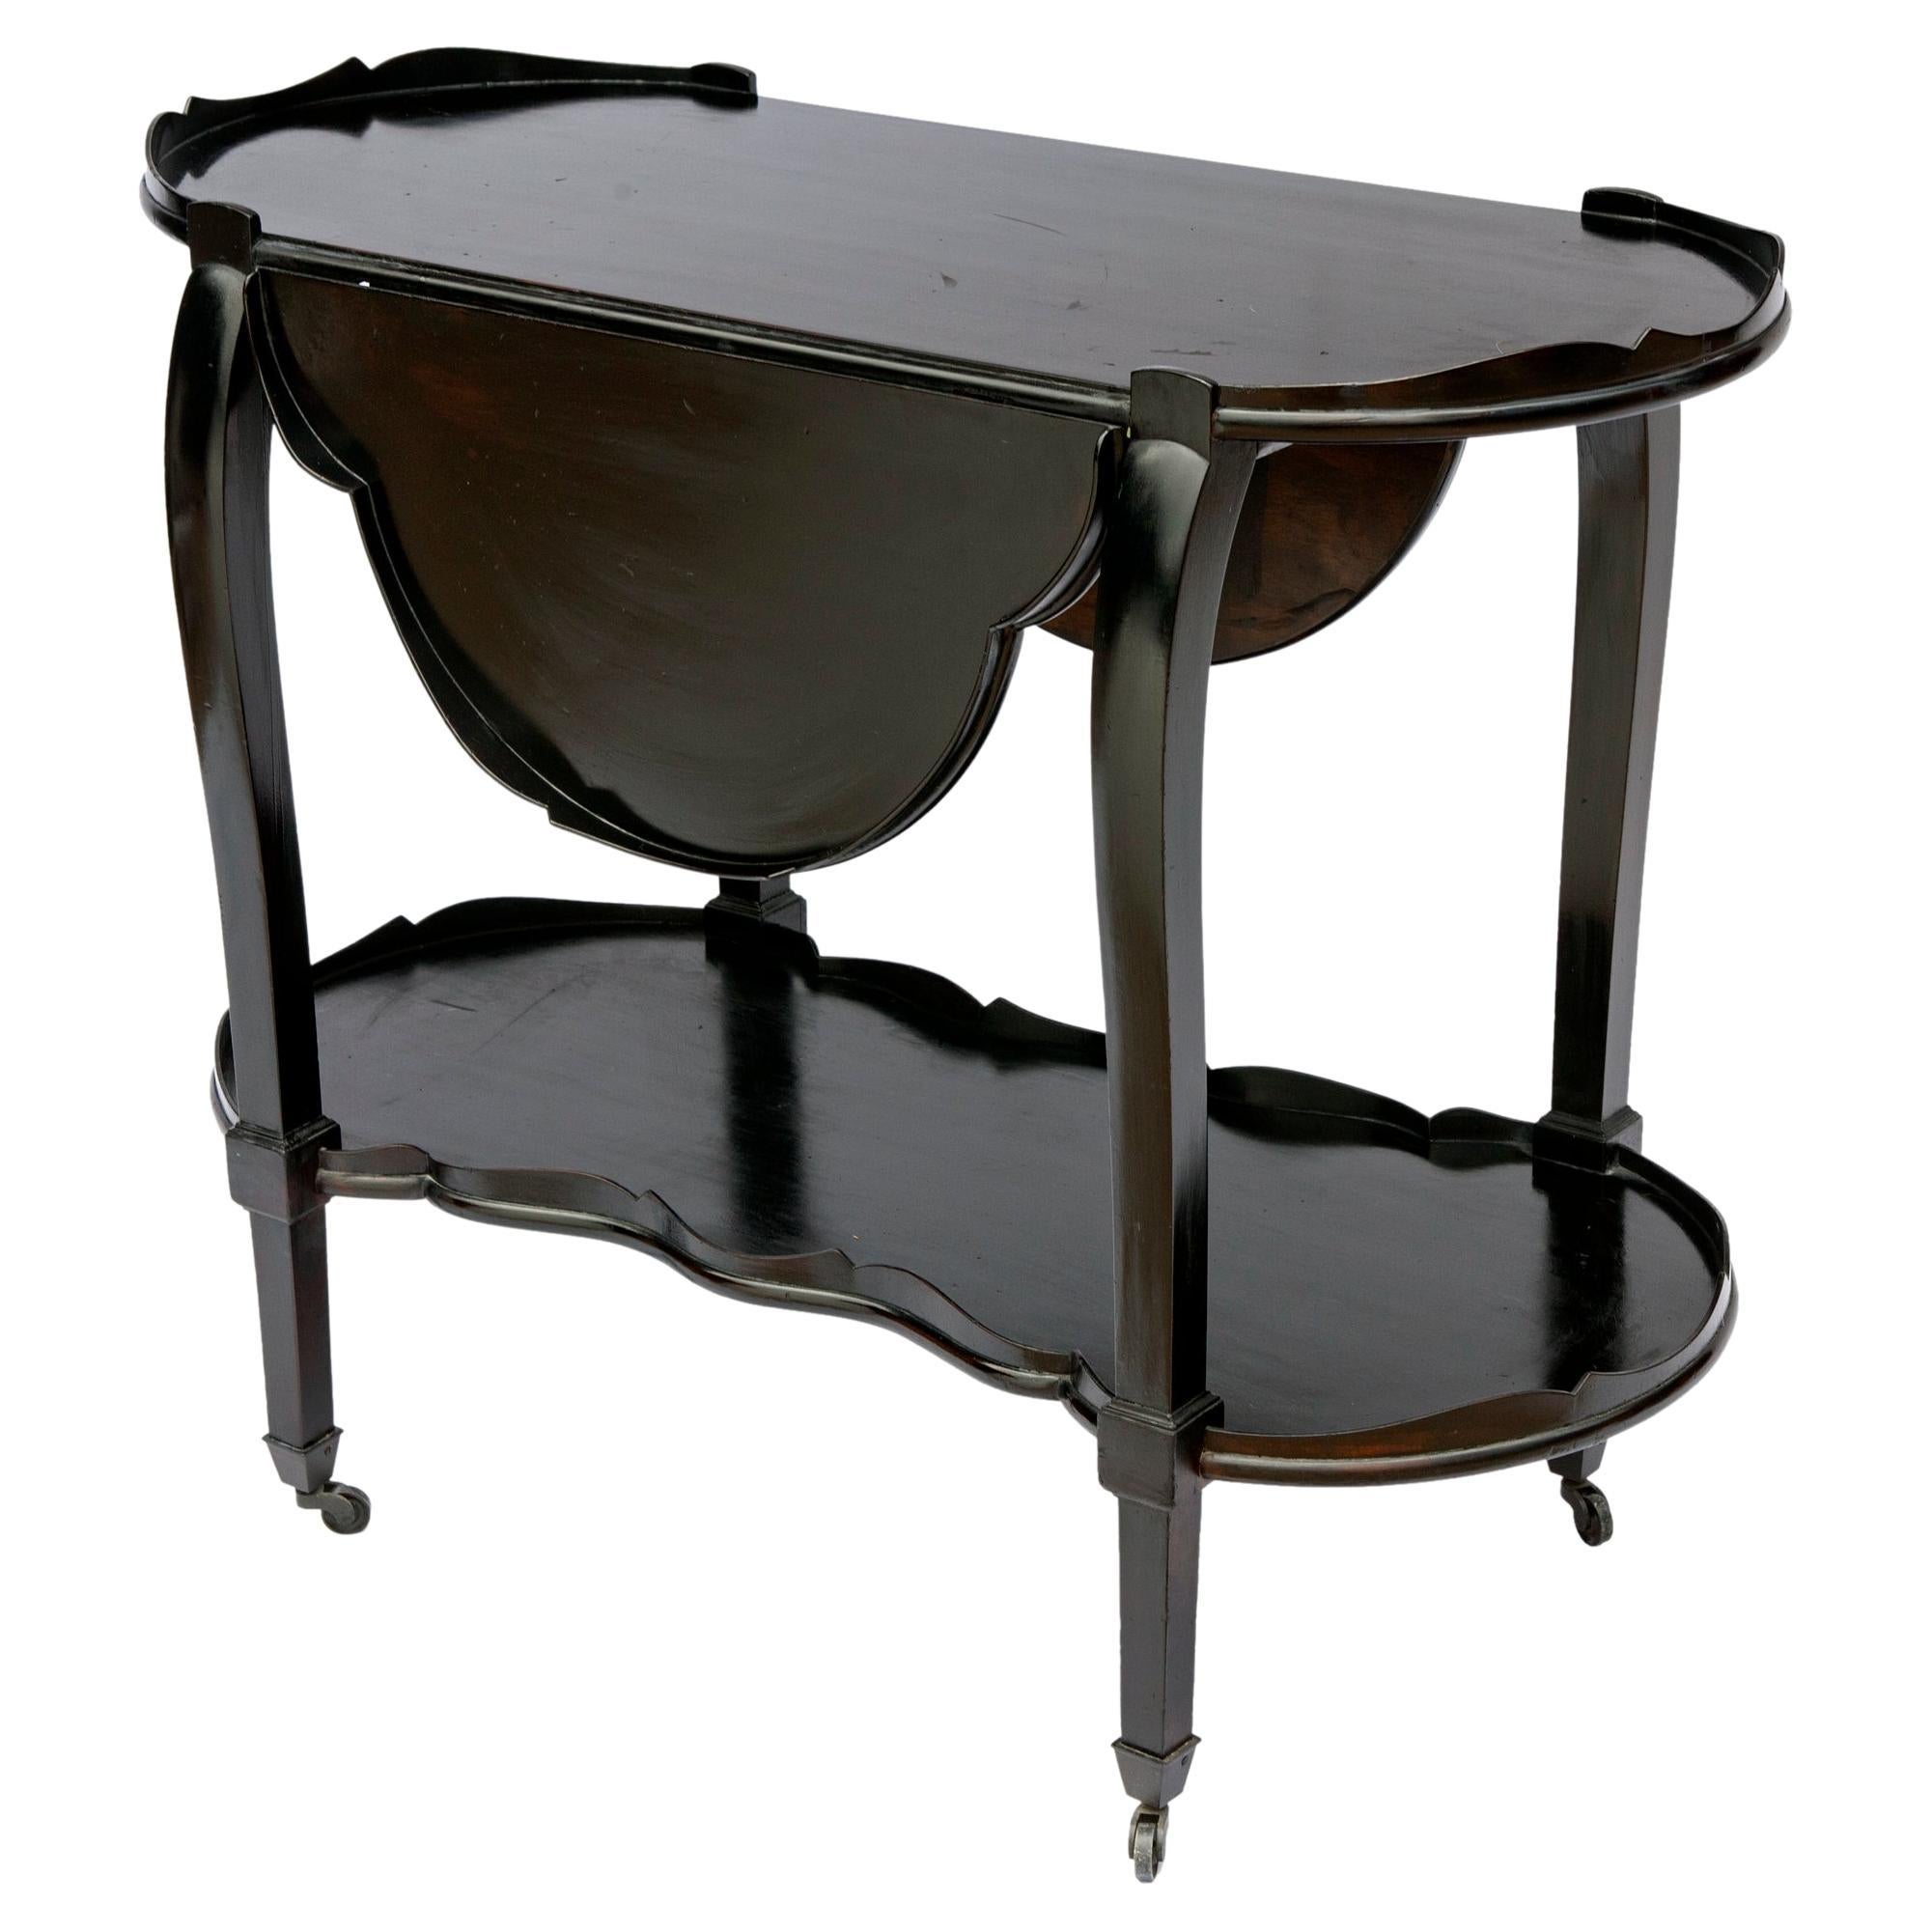 Sleek mahogany bar cart in ebony with lower level, drop leaf top opens to four leaf clover. Scalloped edge on both levels.
Graceful, curved legs on antique brass casters.